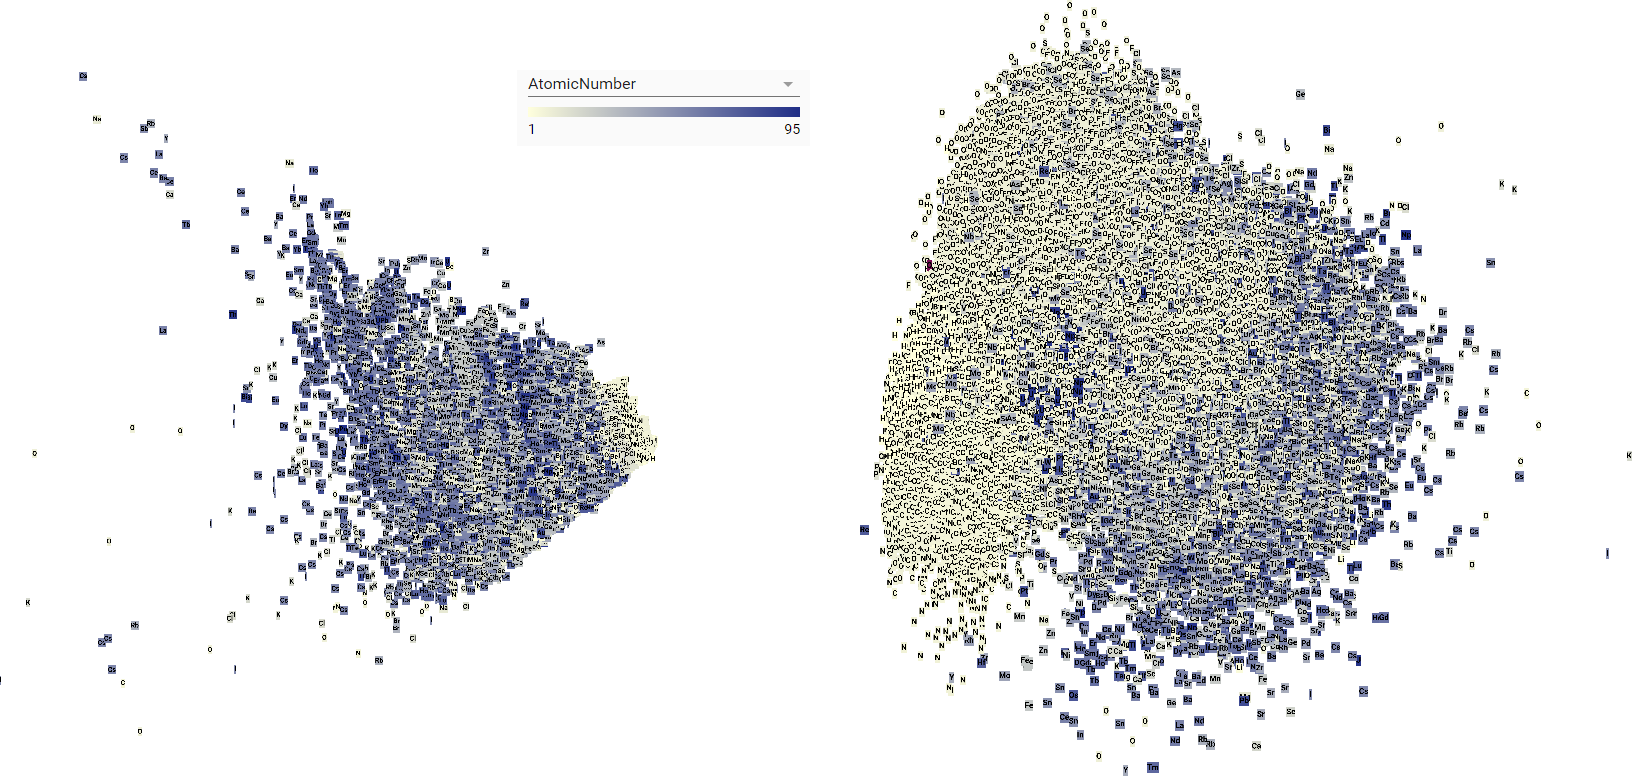 2D representation produced using principal component analysis of topological description (2000D normalized atomic fingerprint)(left) and learned representation (256D) (right). The increased variation of nonmetals like oxygen and carbon (white squares) in the learned representation (right) is more consistent with our chemical understanding of atoms.